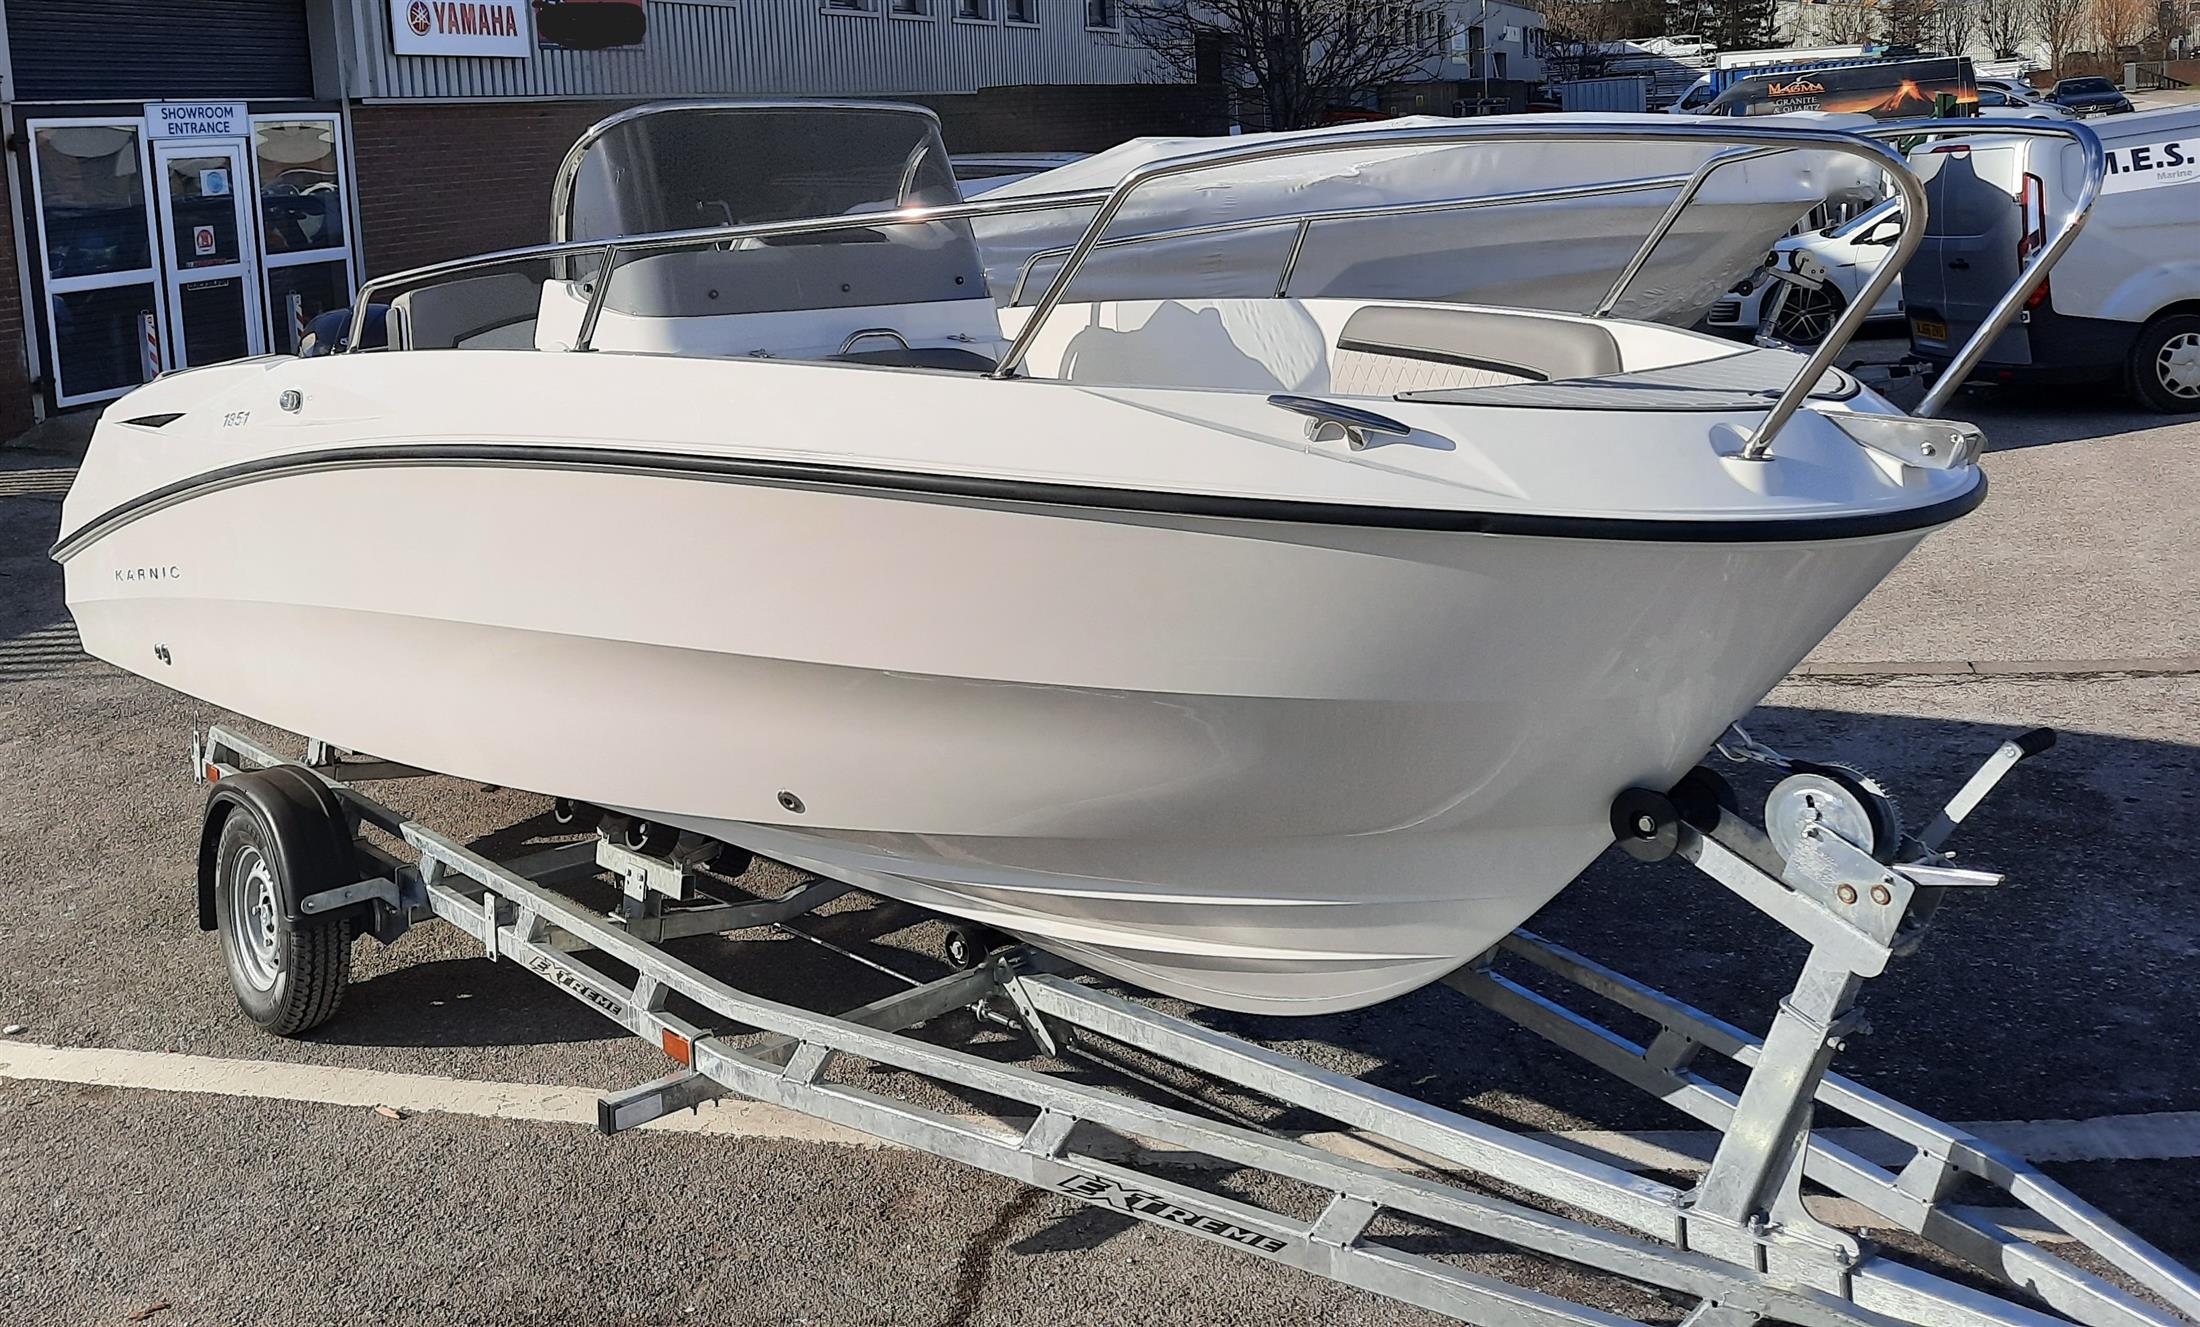 NEW Karnic 1851 MKII Package with 100hp Outboard Engine